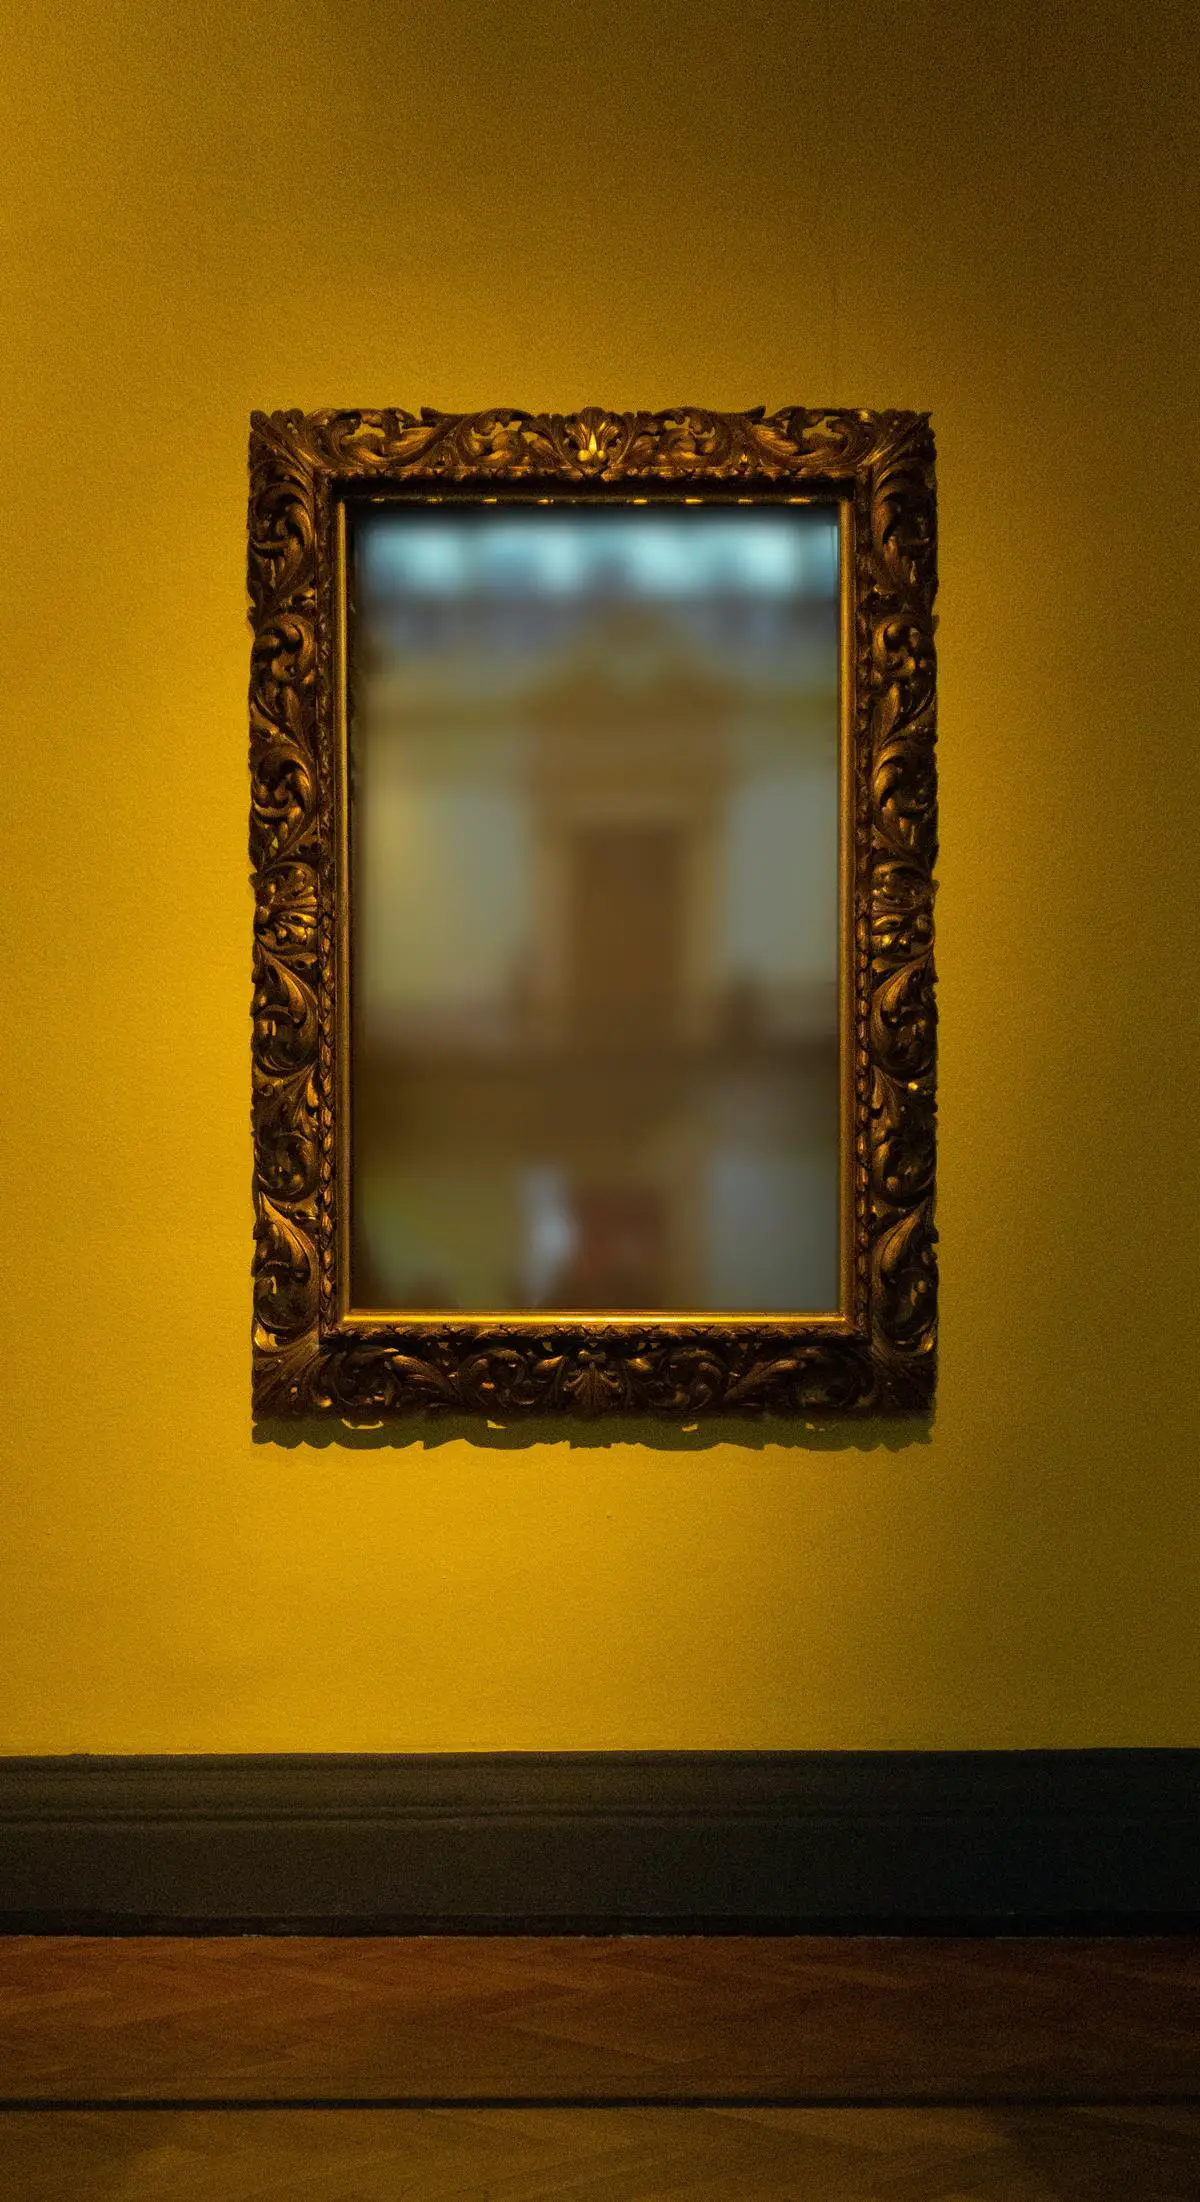 An image of a black metal frame rectangular mirror on a white wall.